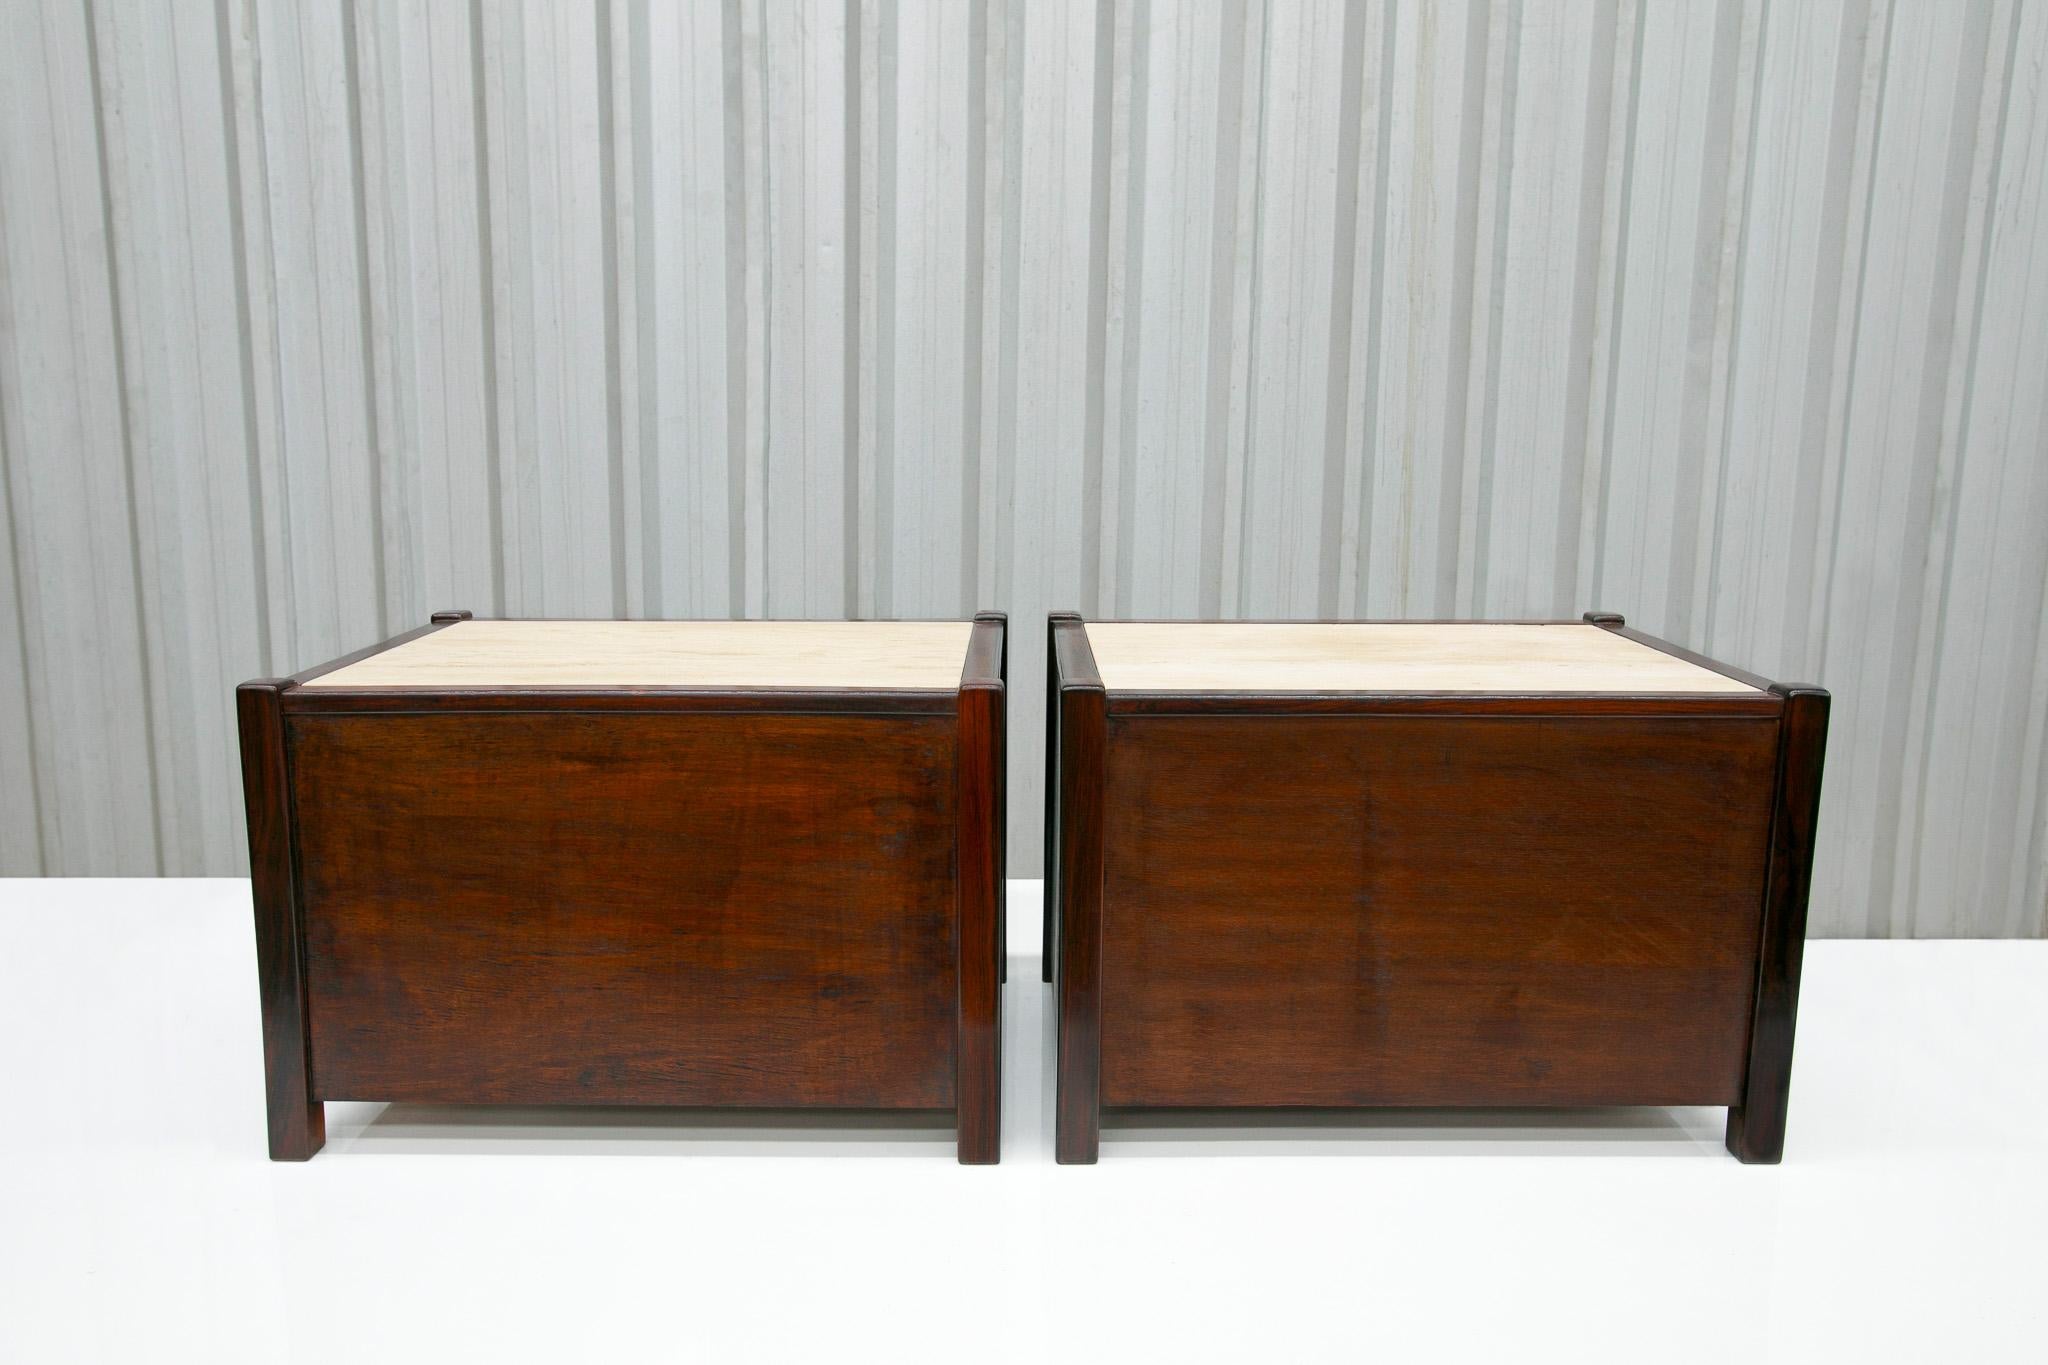 Hand-Carved Brazilian Modern Side Tables Set with Drawers, Travertine & Hardwood by Celina For Sale